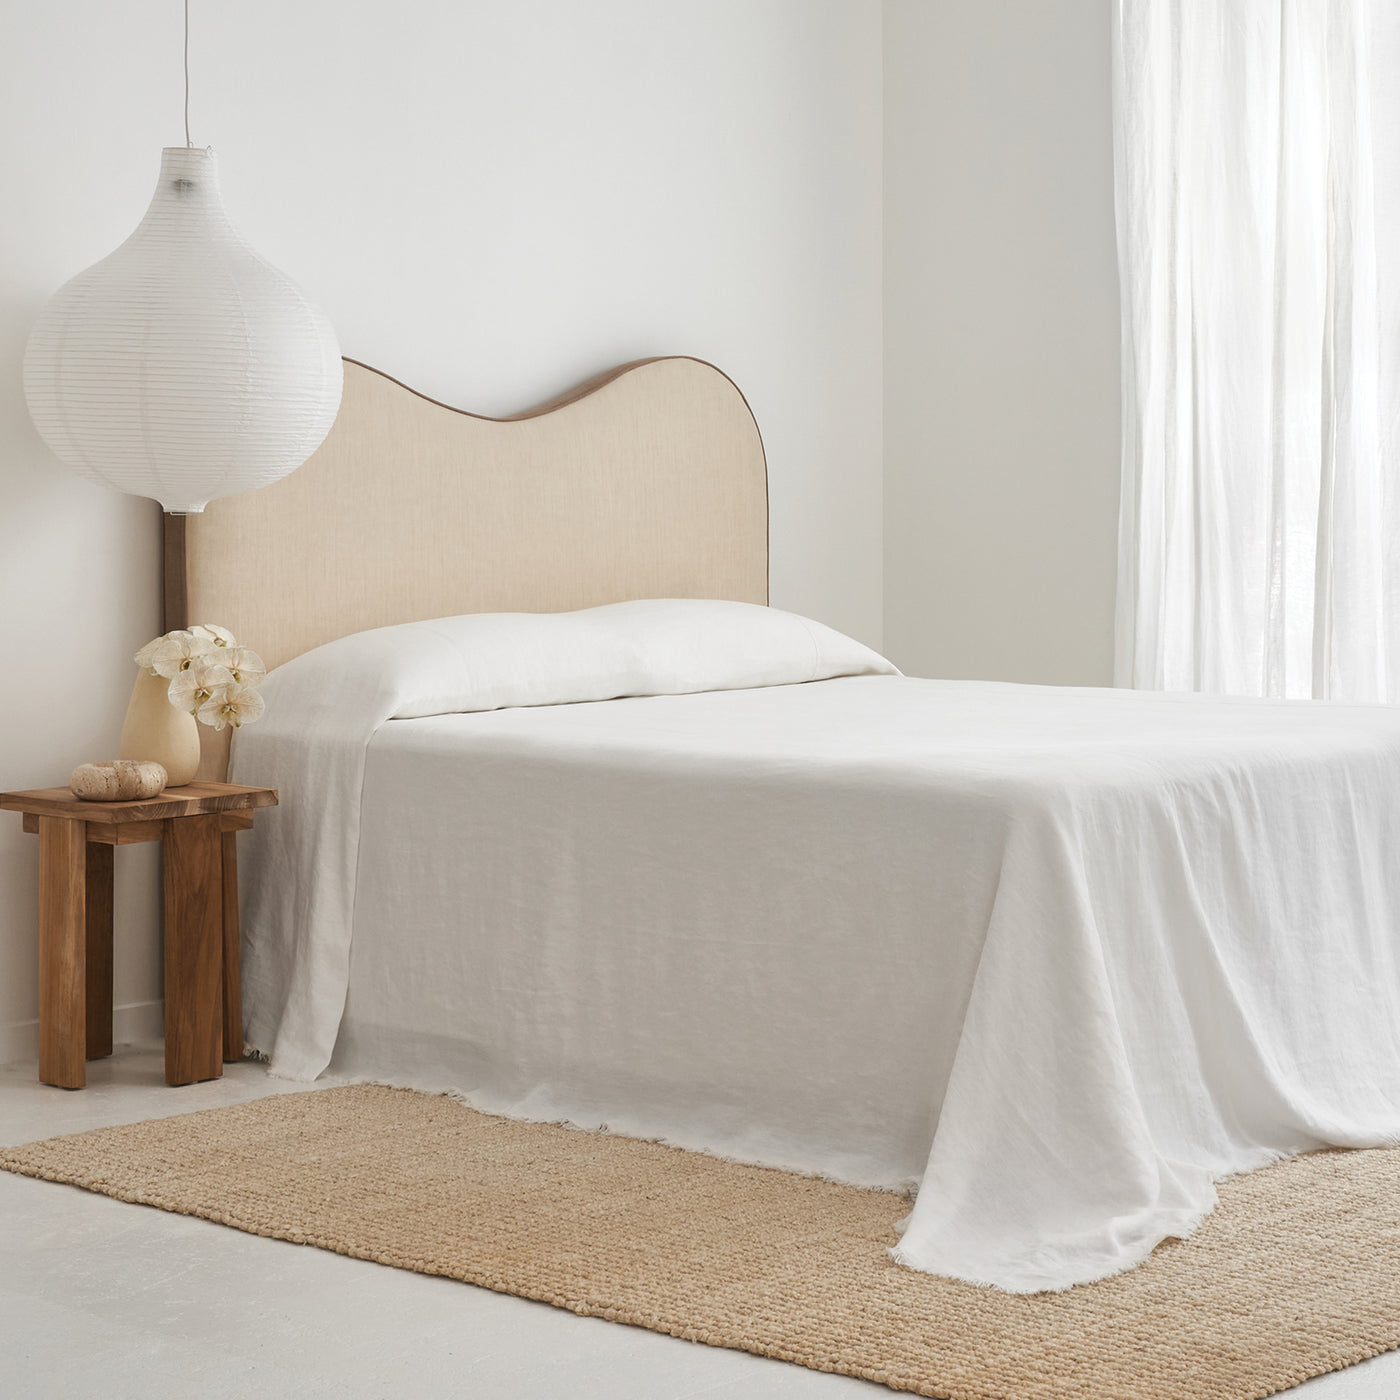 French Flax Linen Heavy Bedcover in White